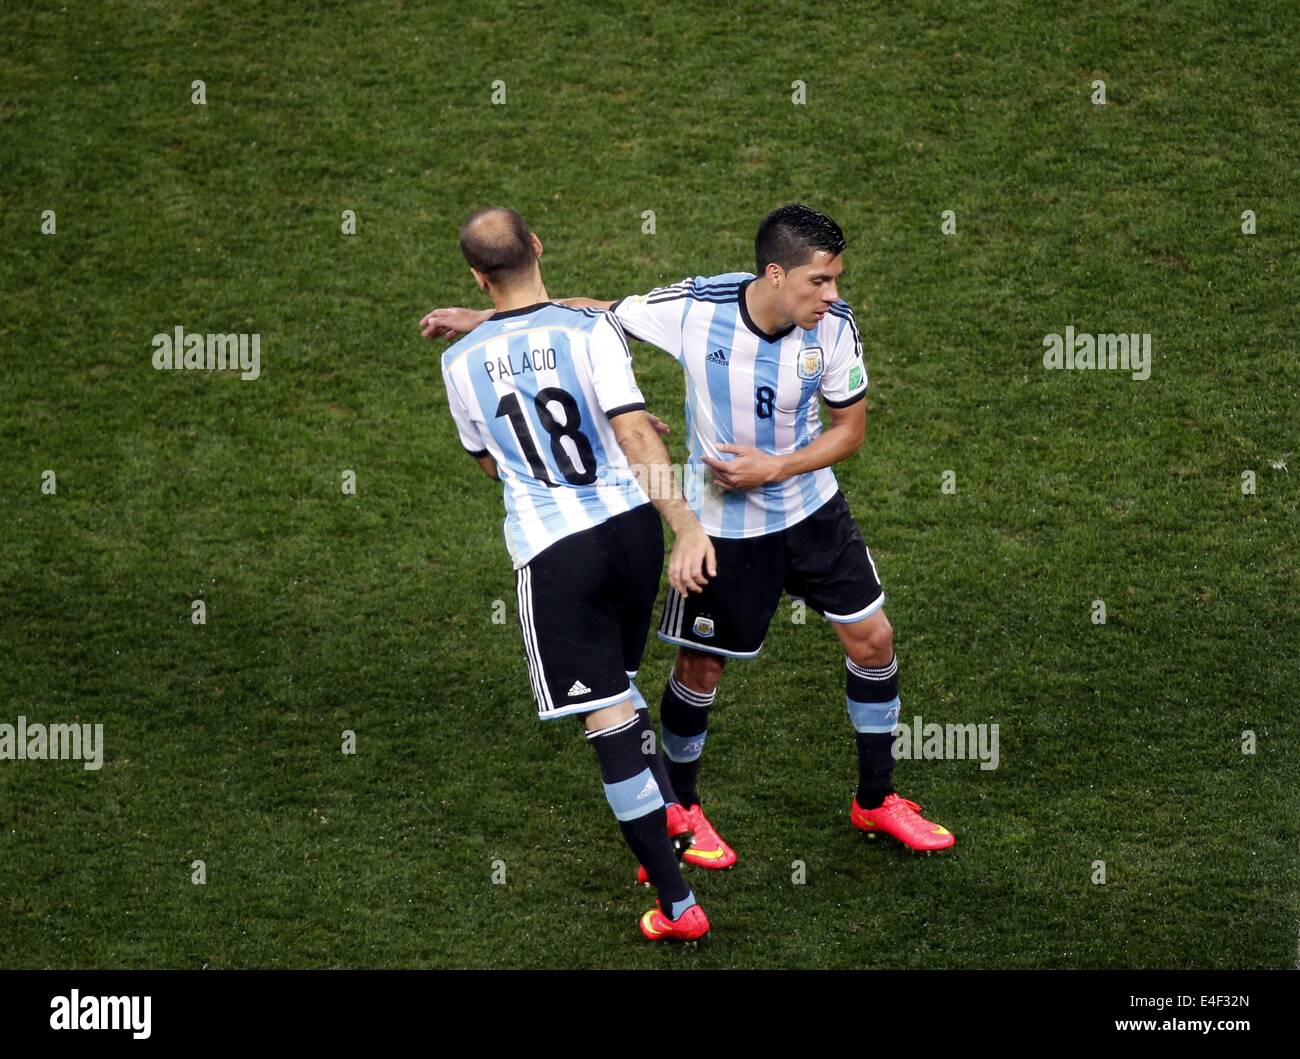 Sao Paulo, Brazil. 9th July, 2014. Argentina's Enzo Perez (R) is substituted by Rodrigo Palacio during a semifinal match between Netherlands and Argentina of 2014 FIFA World Cup at the Arena de Sao Paulo Stadium in Sao Paulo, Brazil, on July 9, 2014. Credit:  Liao Yujie/Xinhua/Alamy Live News Stock Photo